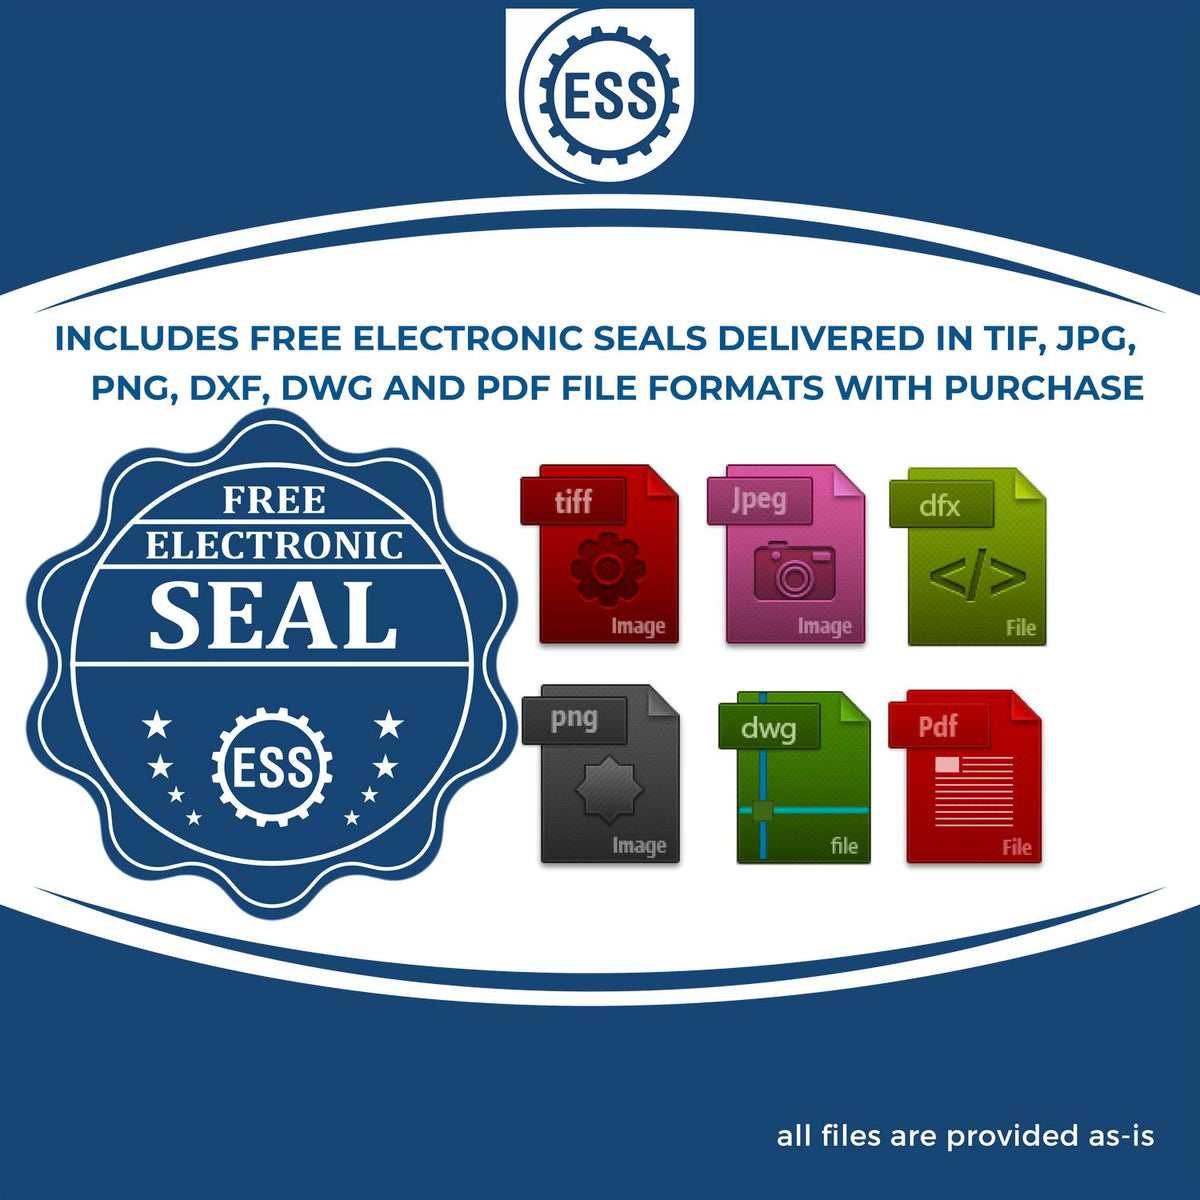 An infographic for the free electronic seal for the Gift Vermont Land Surveyor Seal illustrating the different file type icons such as DXF, DWG, TIF, JPG and PNG.